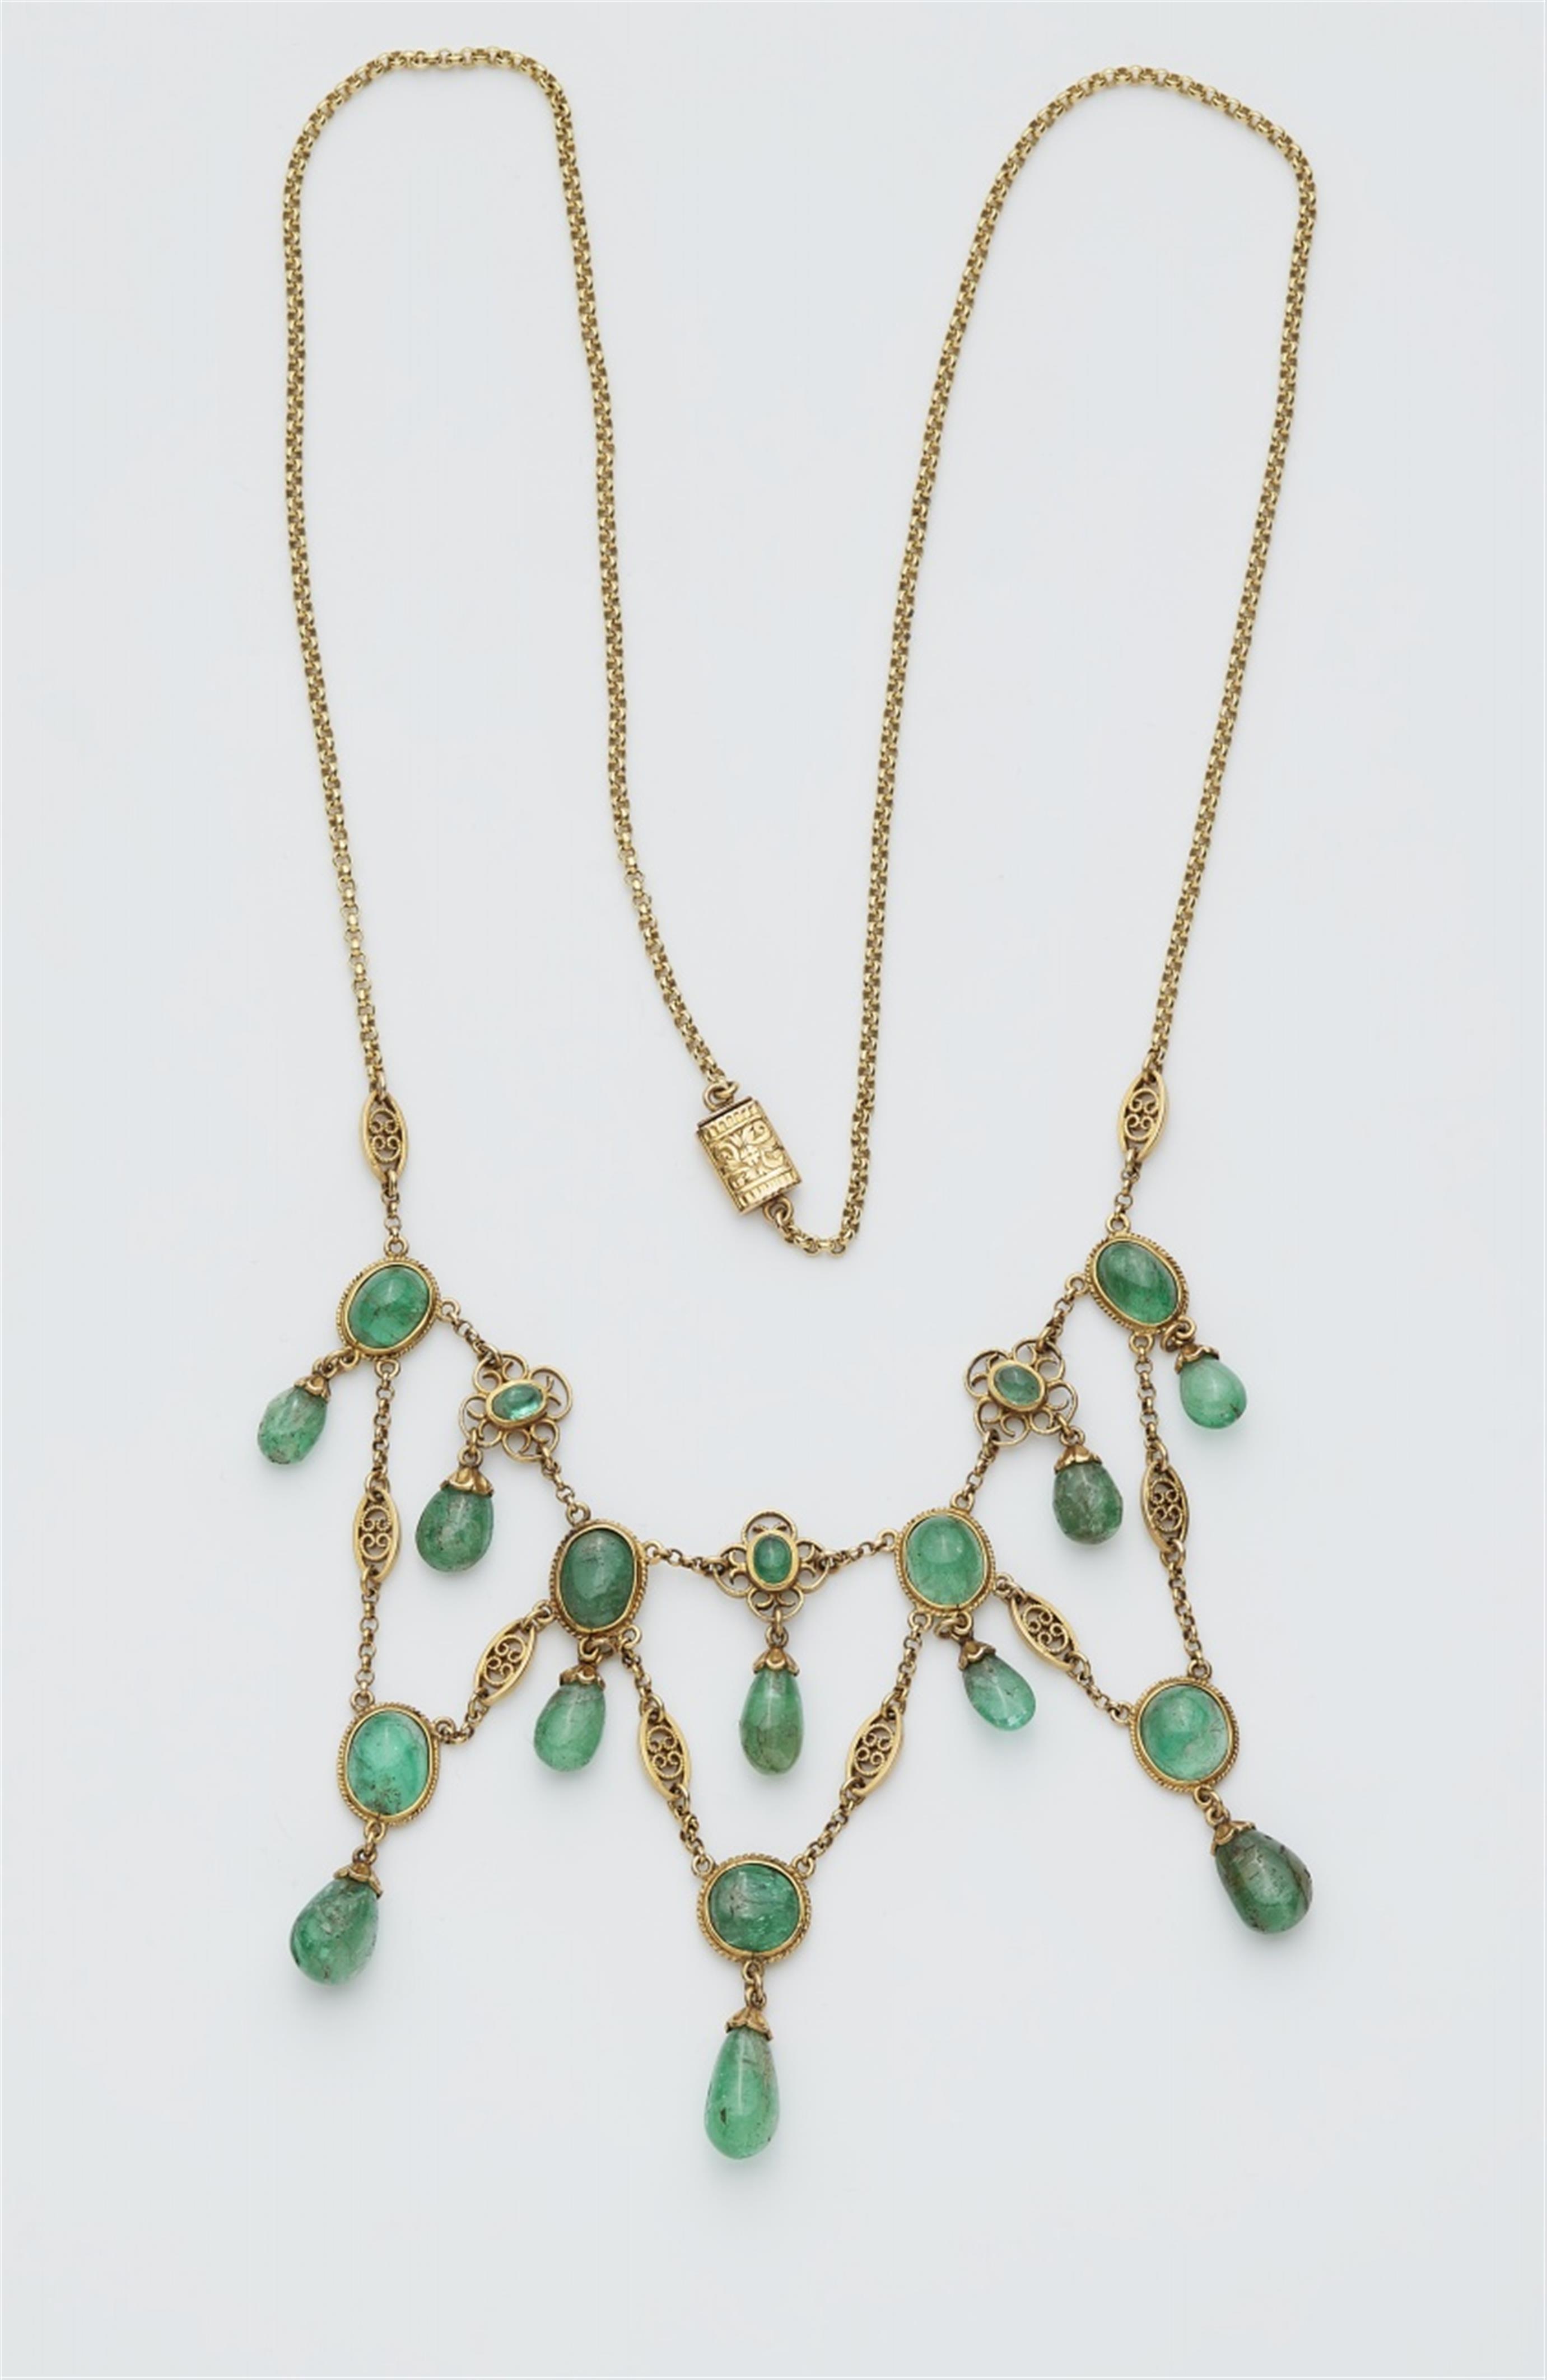 An 18k gold emerald necklace - image-1